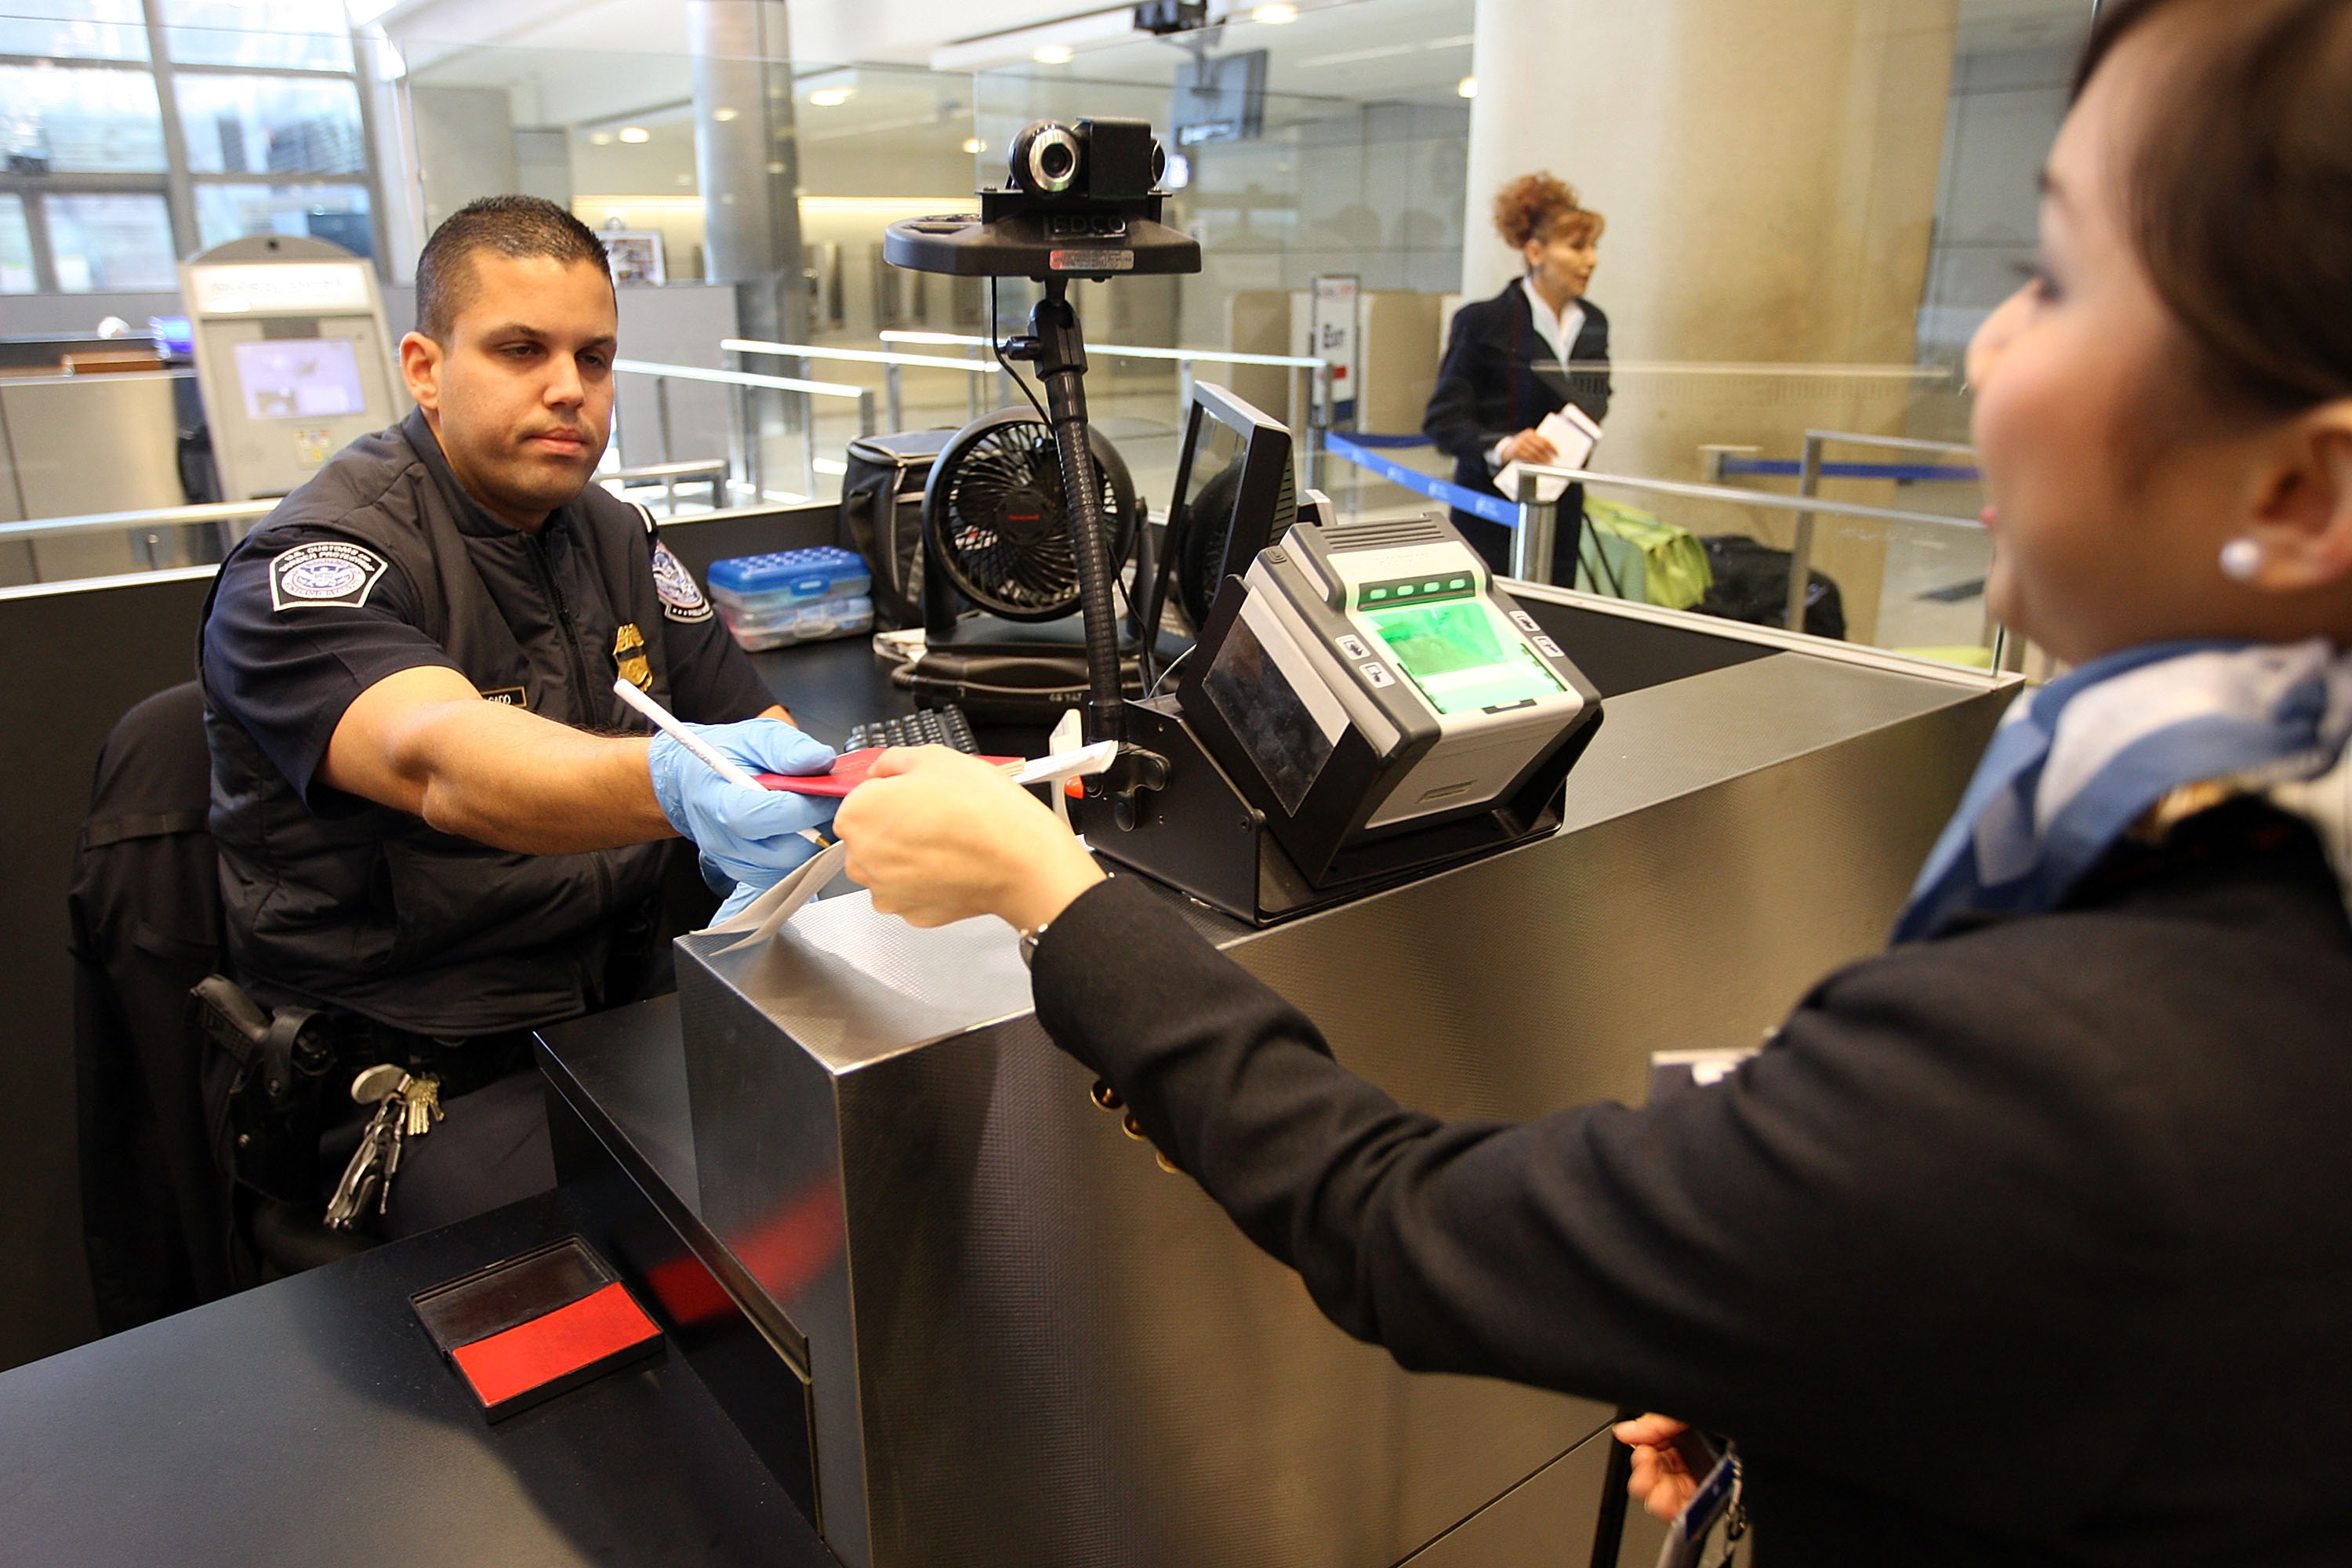 US border agents: We won't search data “located solely on remote servers” | Ars Technica